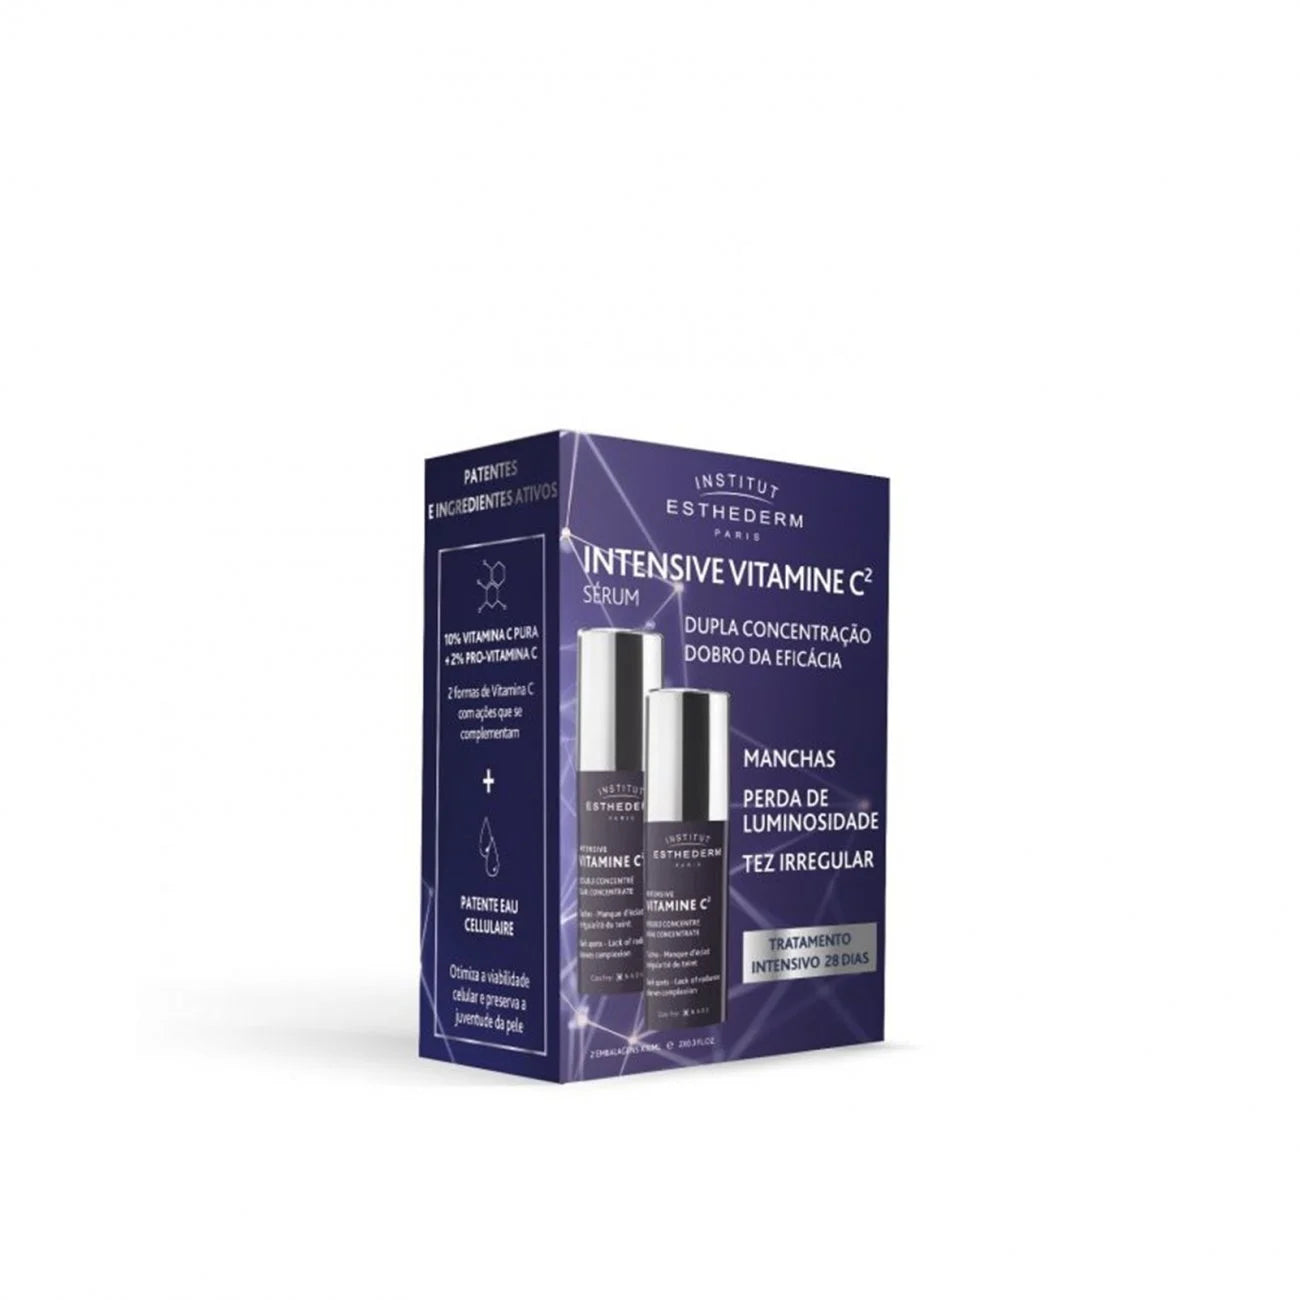 Esthederm Intensive Vitamine C² Dual Concentrate 2x10ml